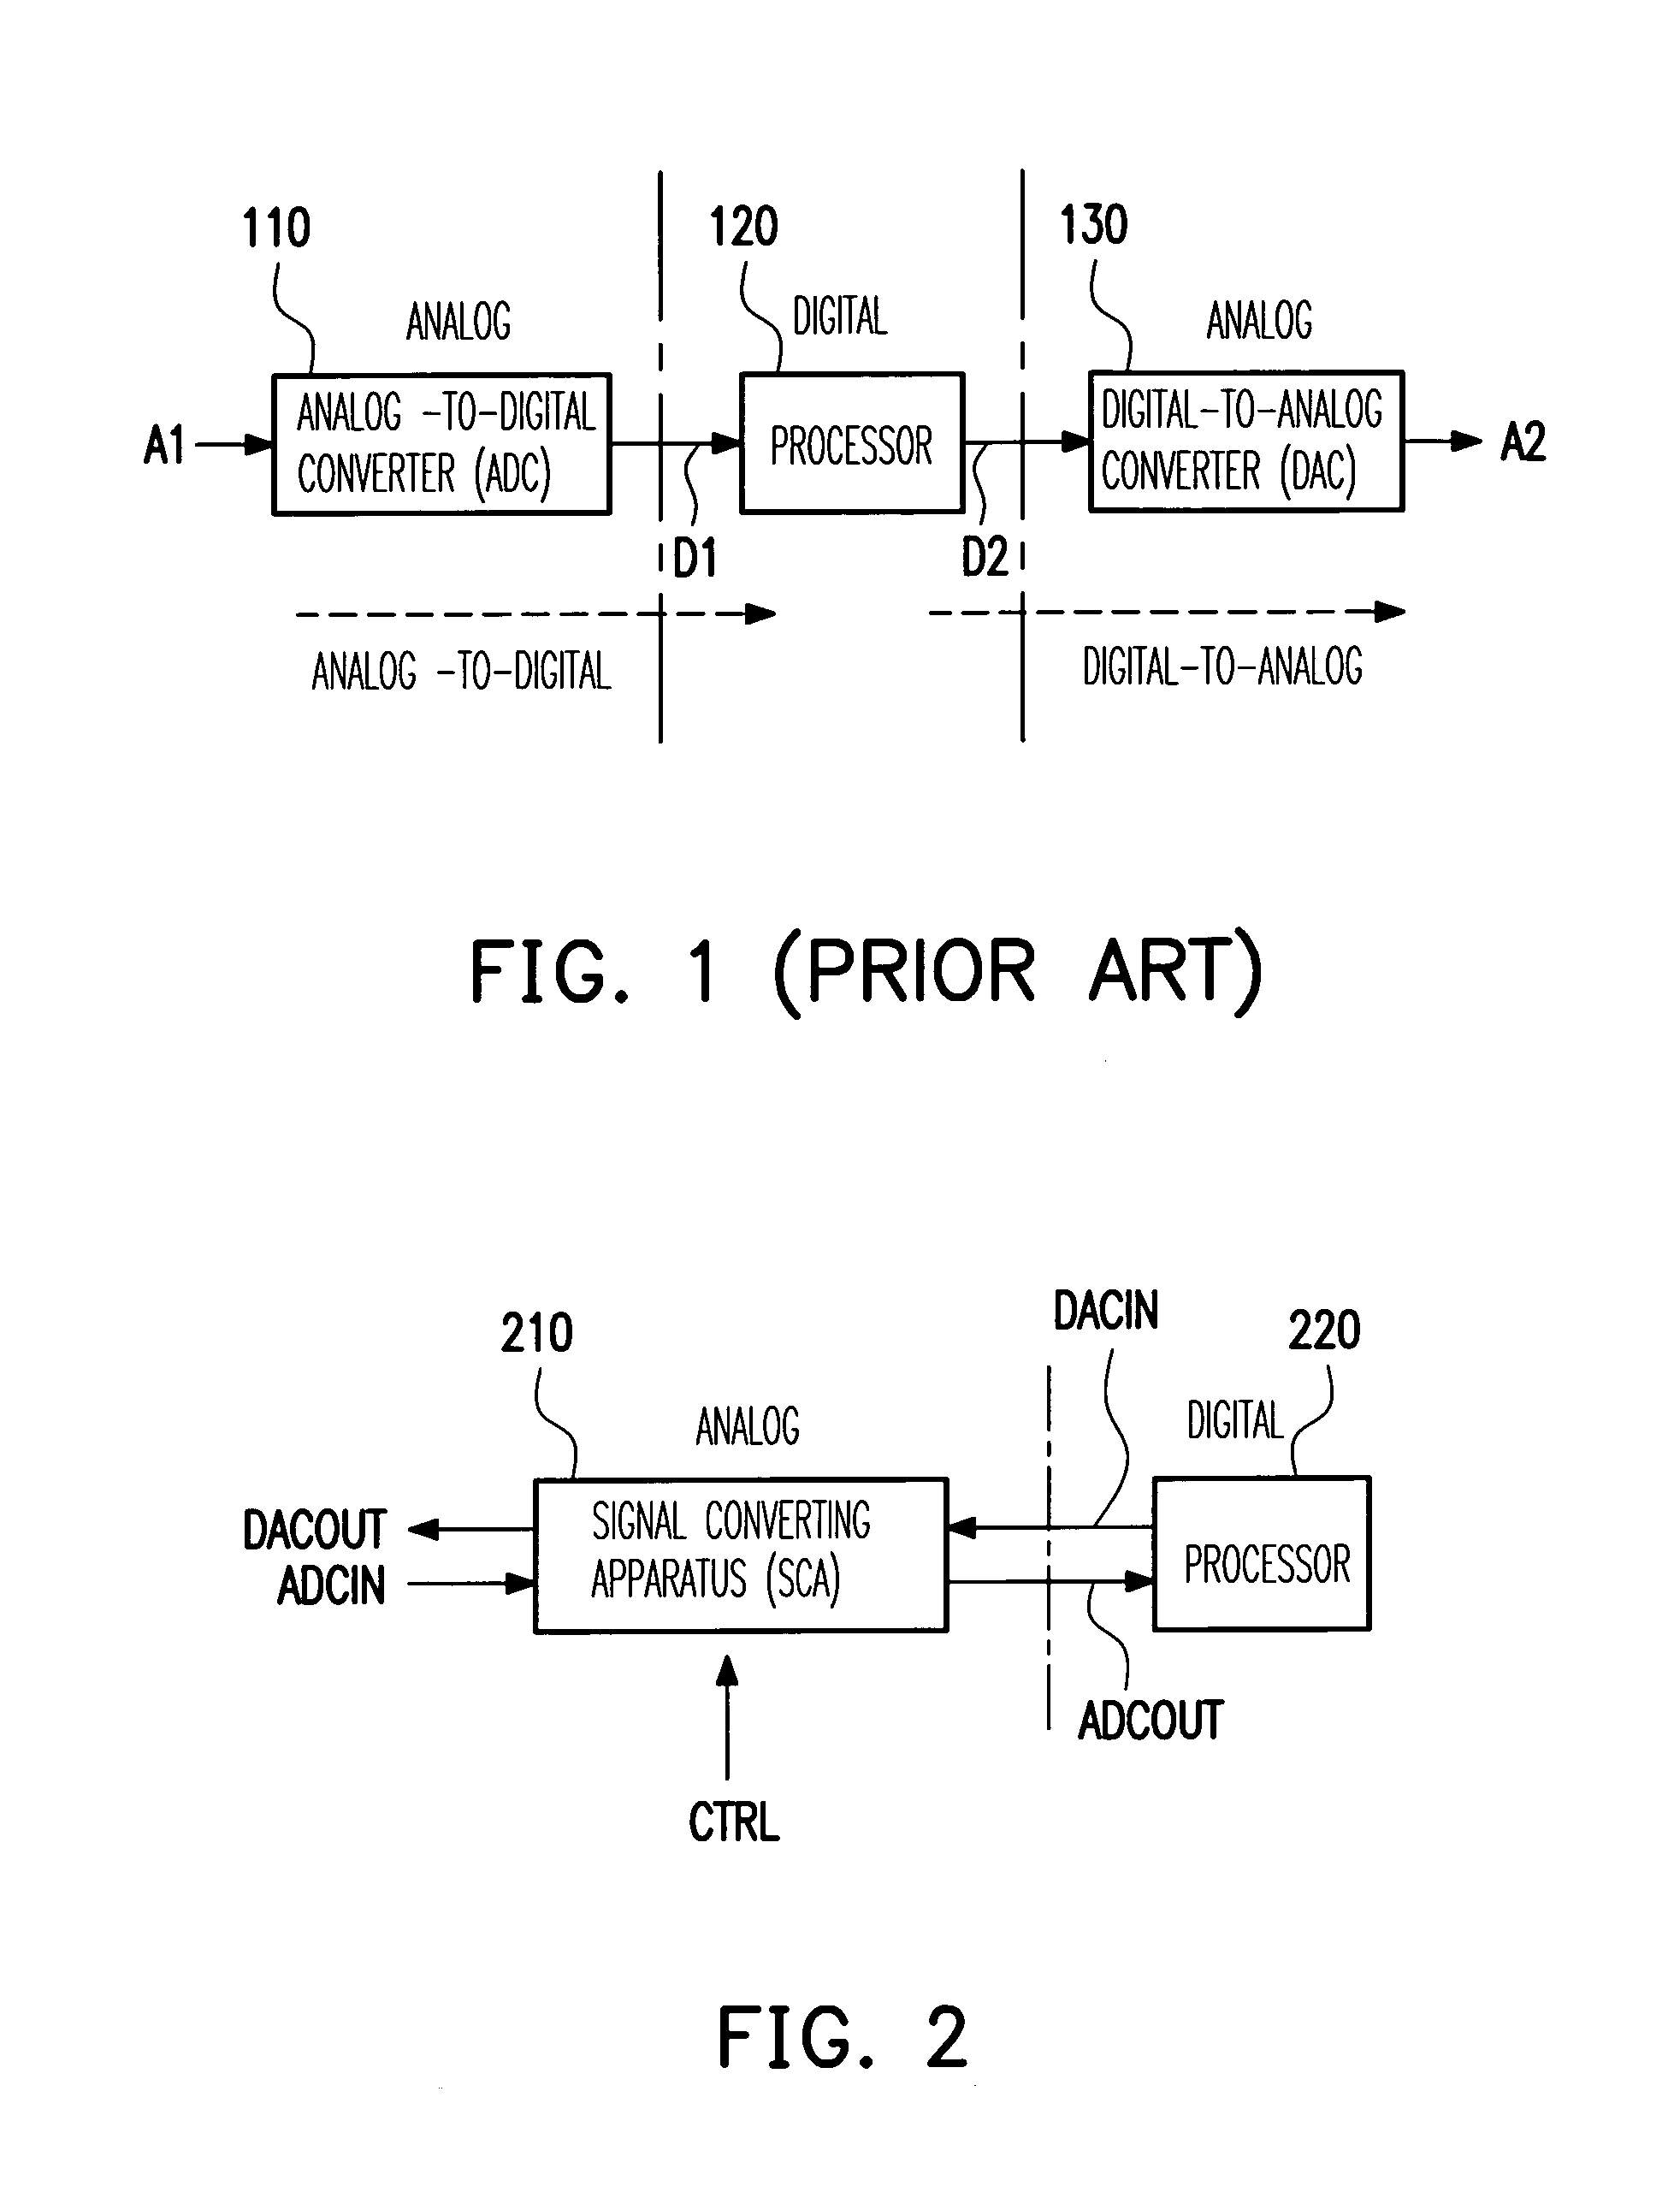 Signal converting apparatus for integrating analog-to-digital converter and digital-to-analog converter and integration unit